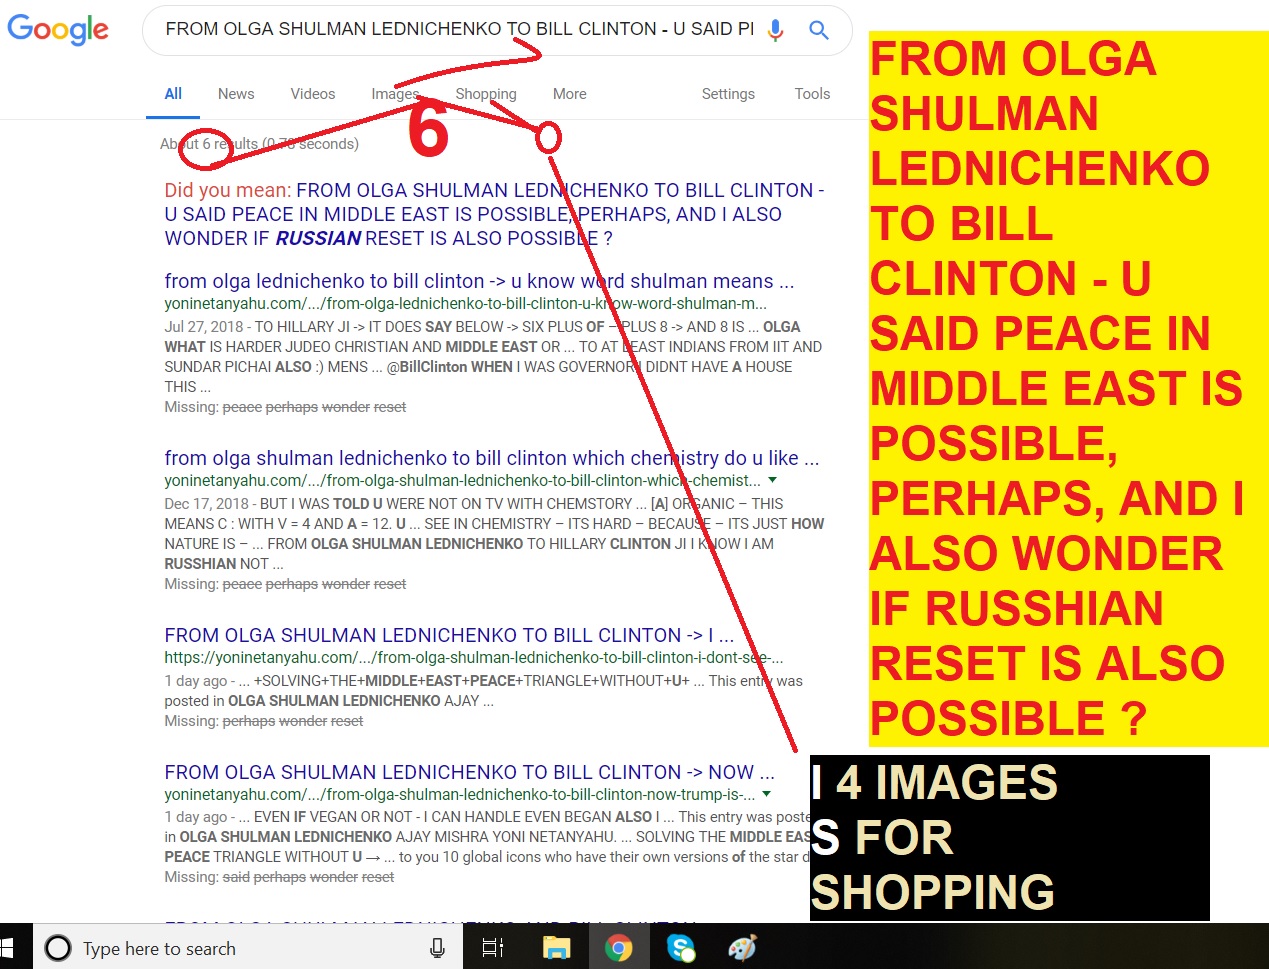 FROM OLGA SHULMAN LEDNICHENKO TO BILL CLINTON - U SAID PEACE IN MIDDLE EAST IS POSSIBLE, PERHAPS, AND I ALSO WONDER IF RUSSHIAN RESET IS ALSO POSSIBLE